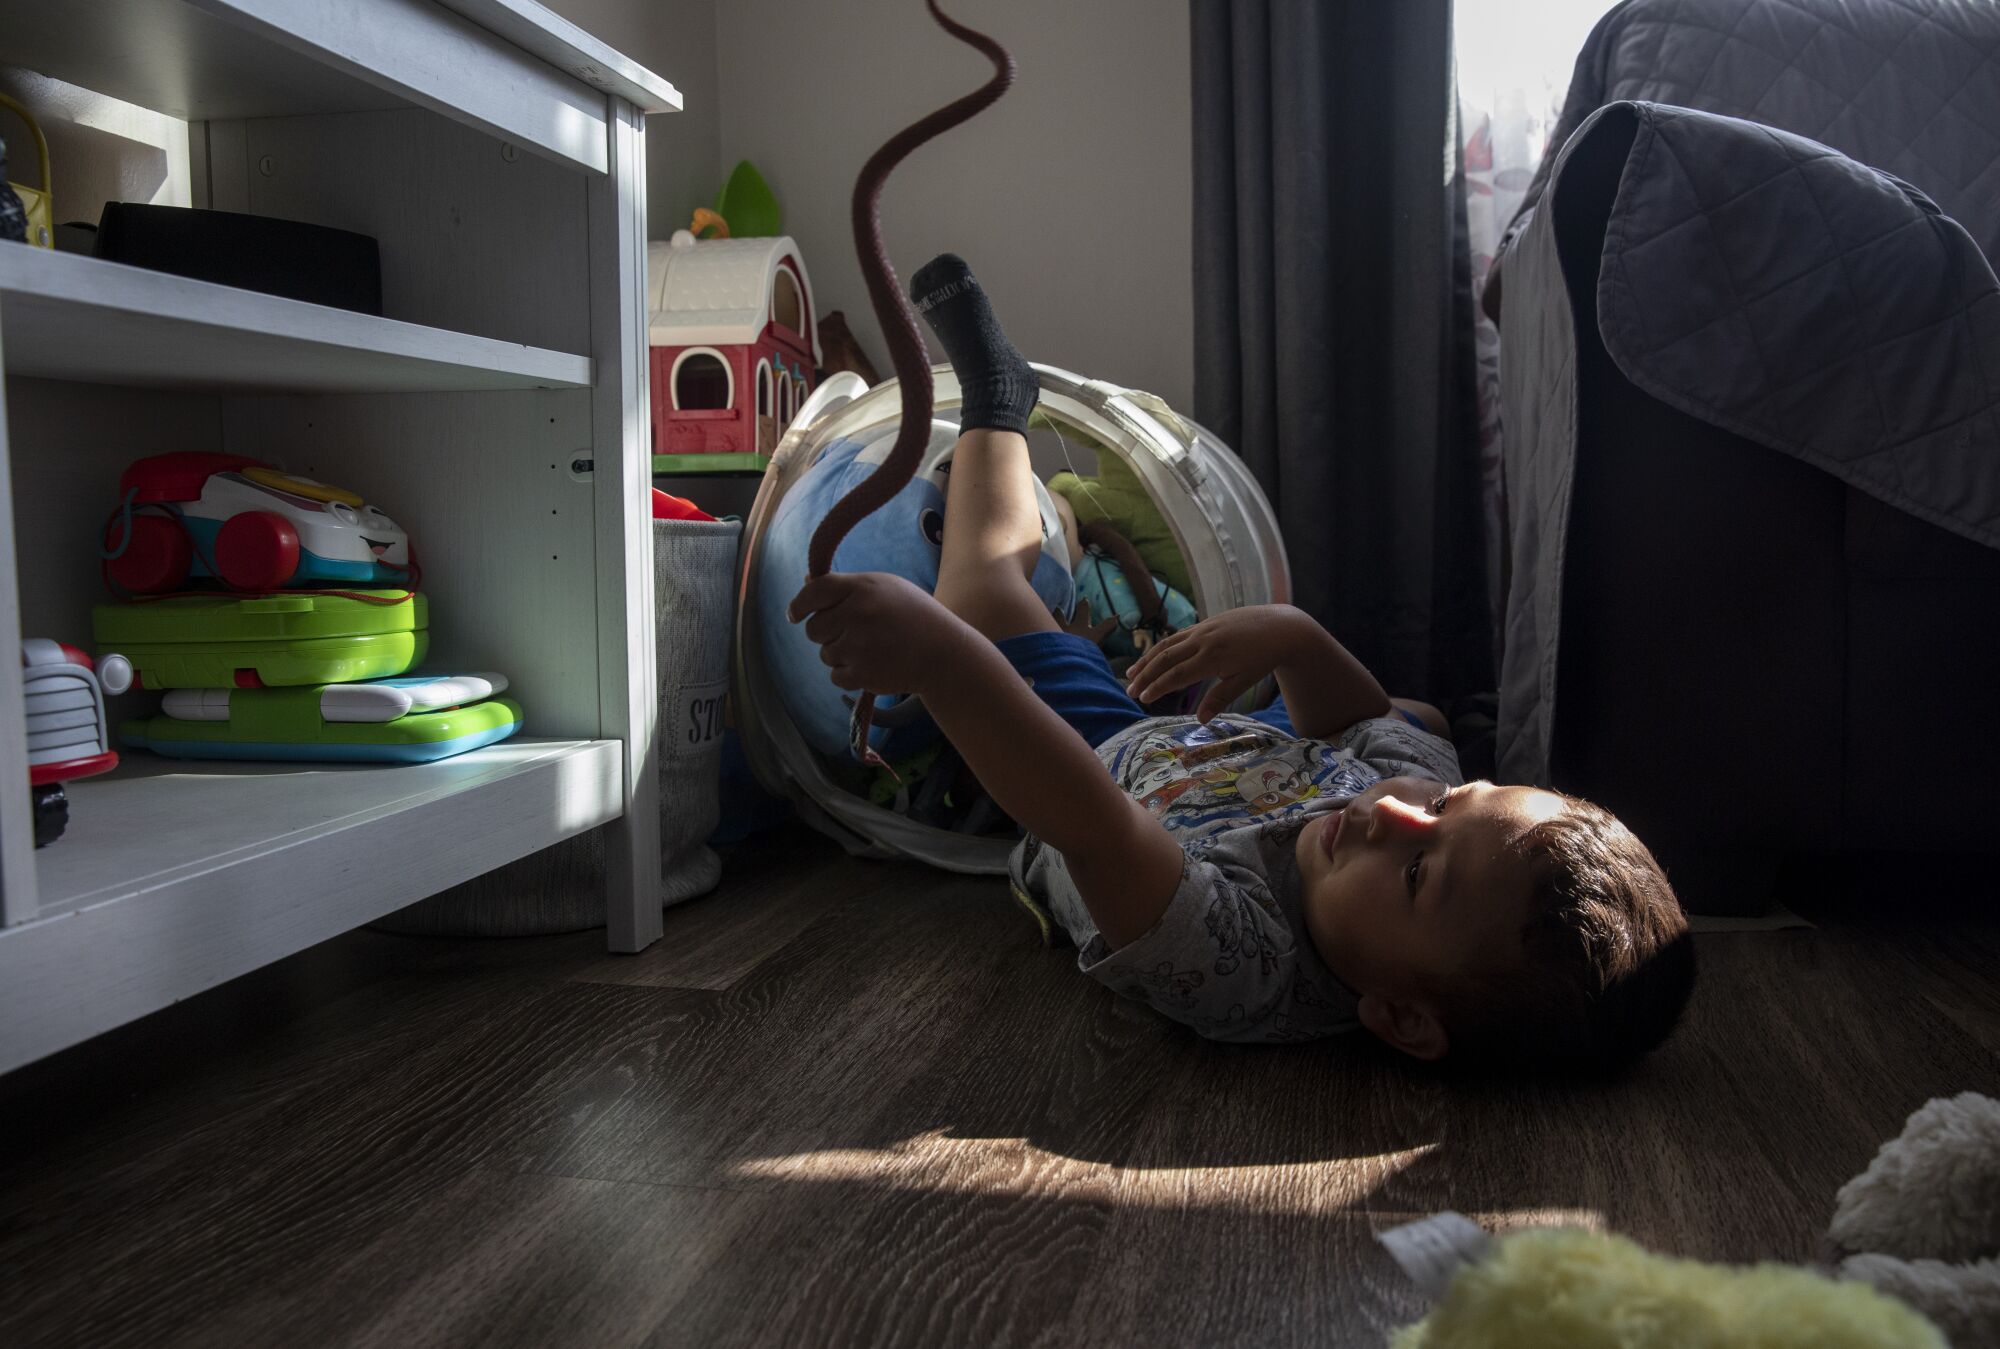 Linda Vista, California - July 13: Mateo, 2, plays on the living room floor of his family's home.